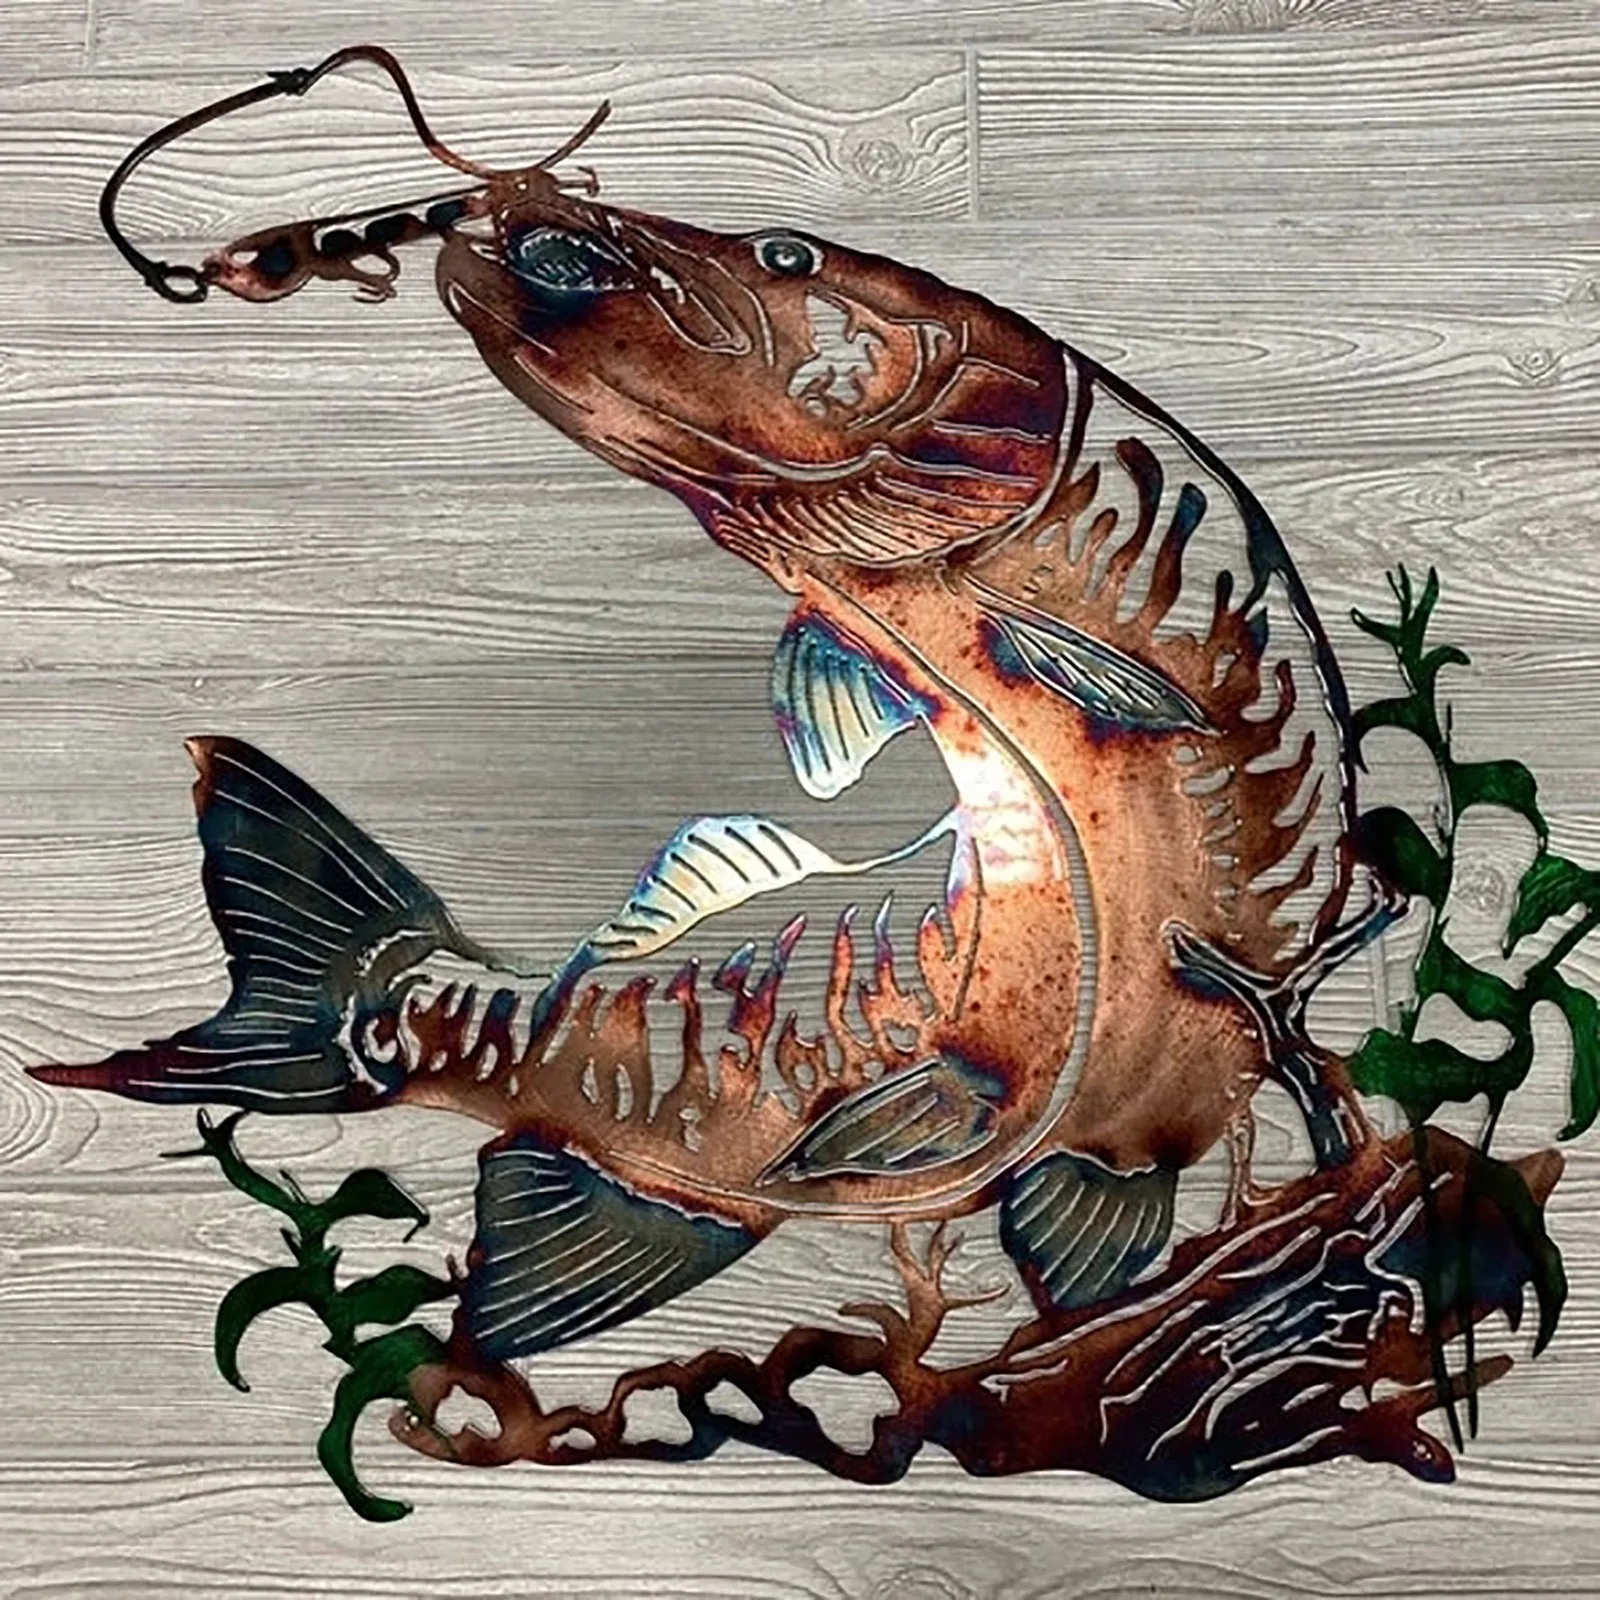 3D Metal Wall Art Decoration Hollow Out Fish Silhouette Sculpture Fishing  Scene Decal Sticker Ornament Rustic Cabin Decor